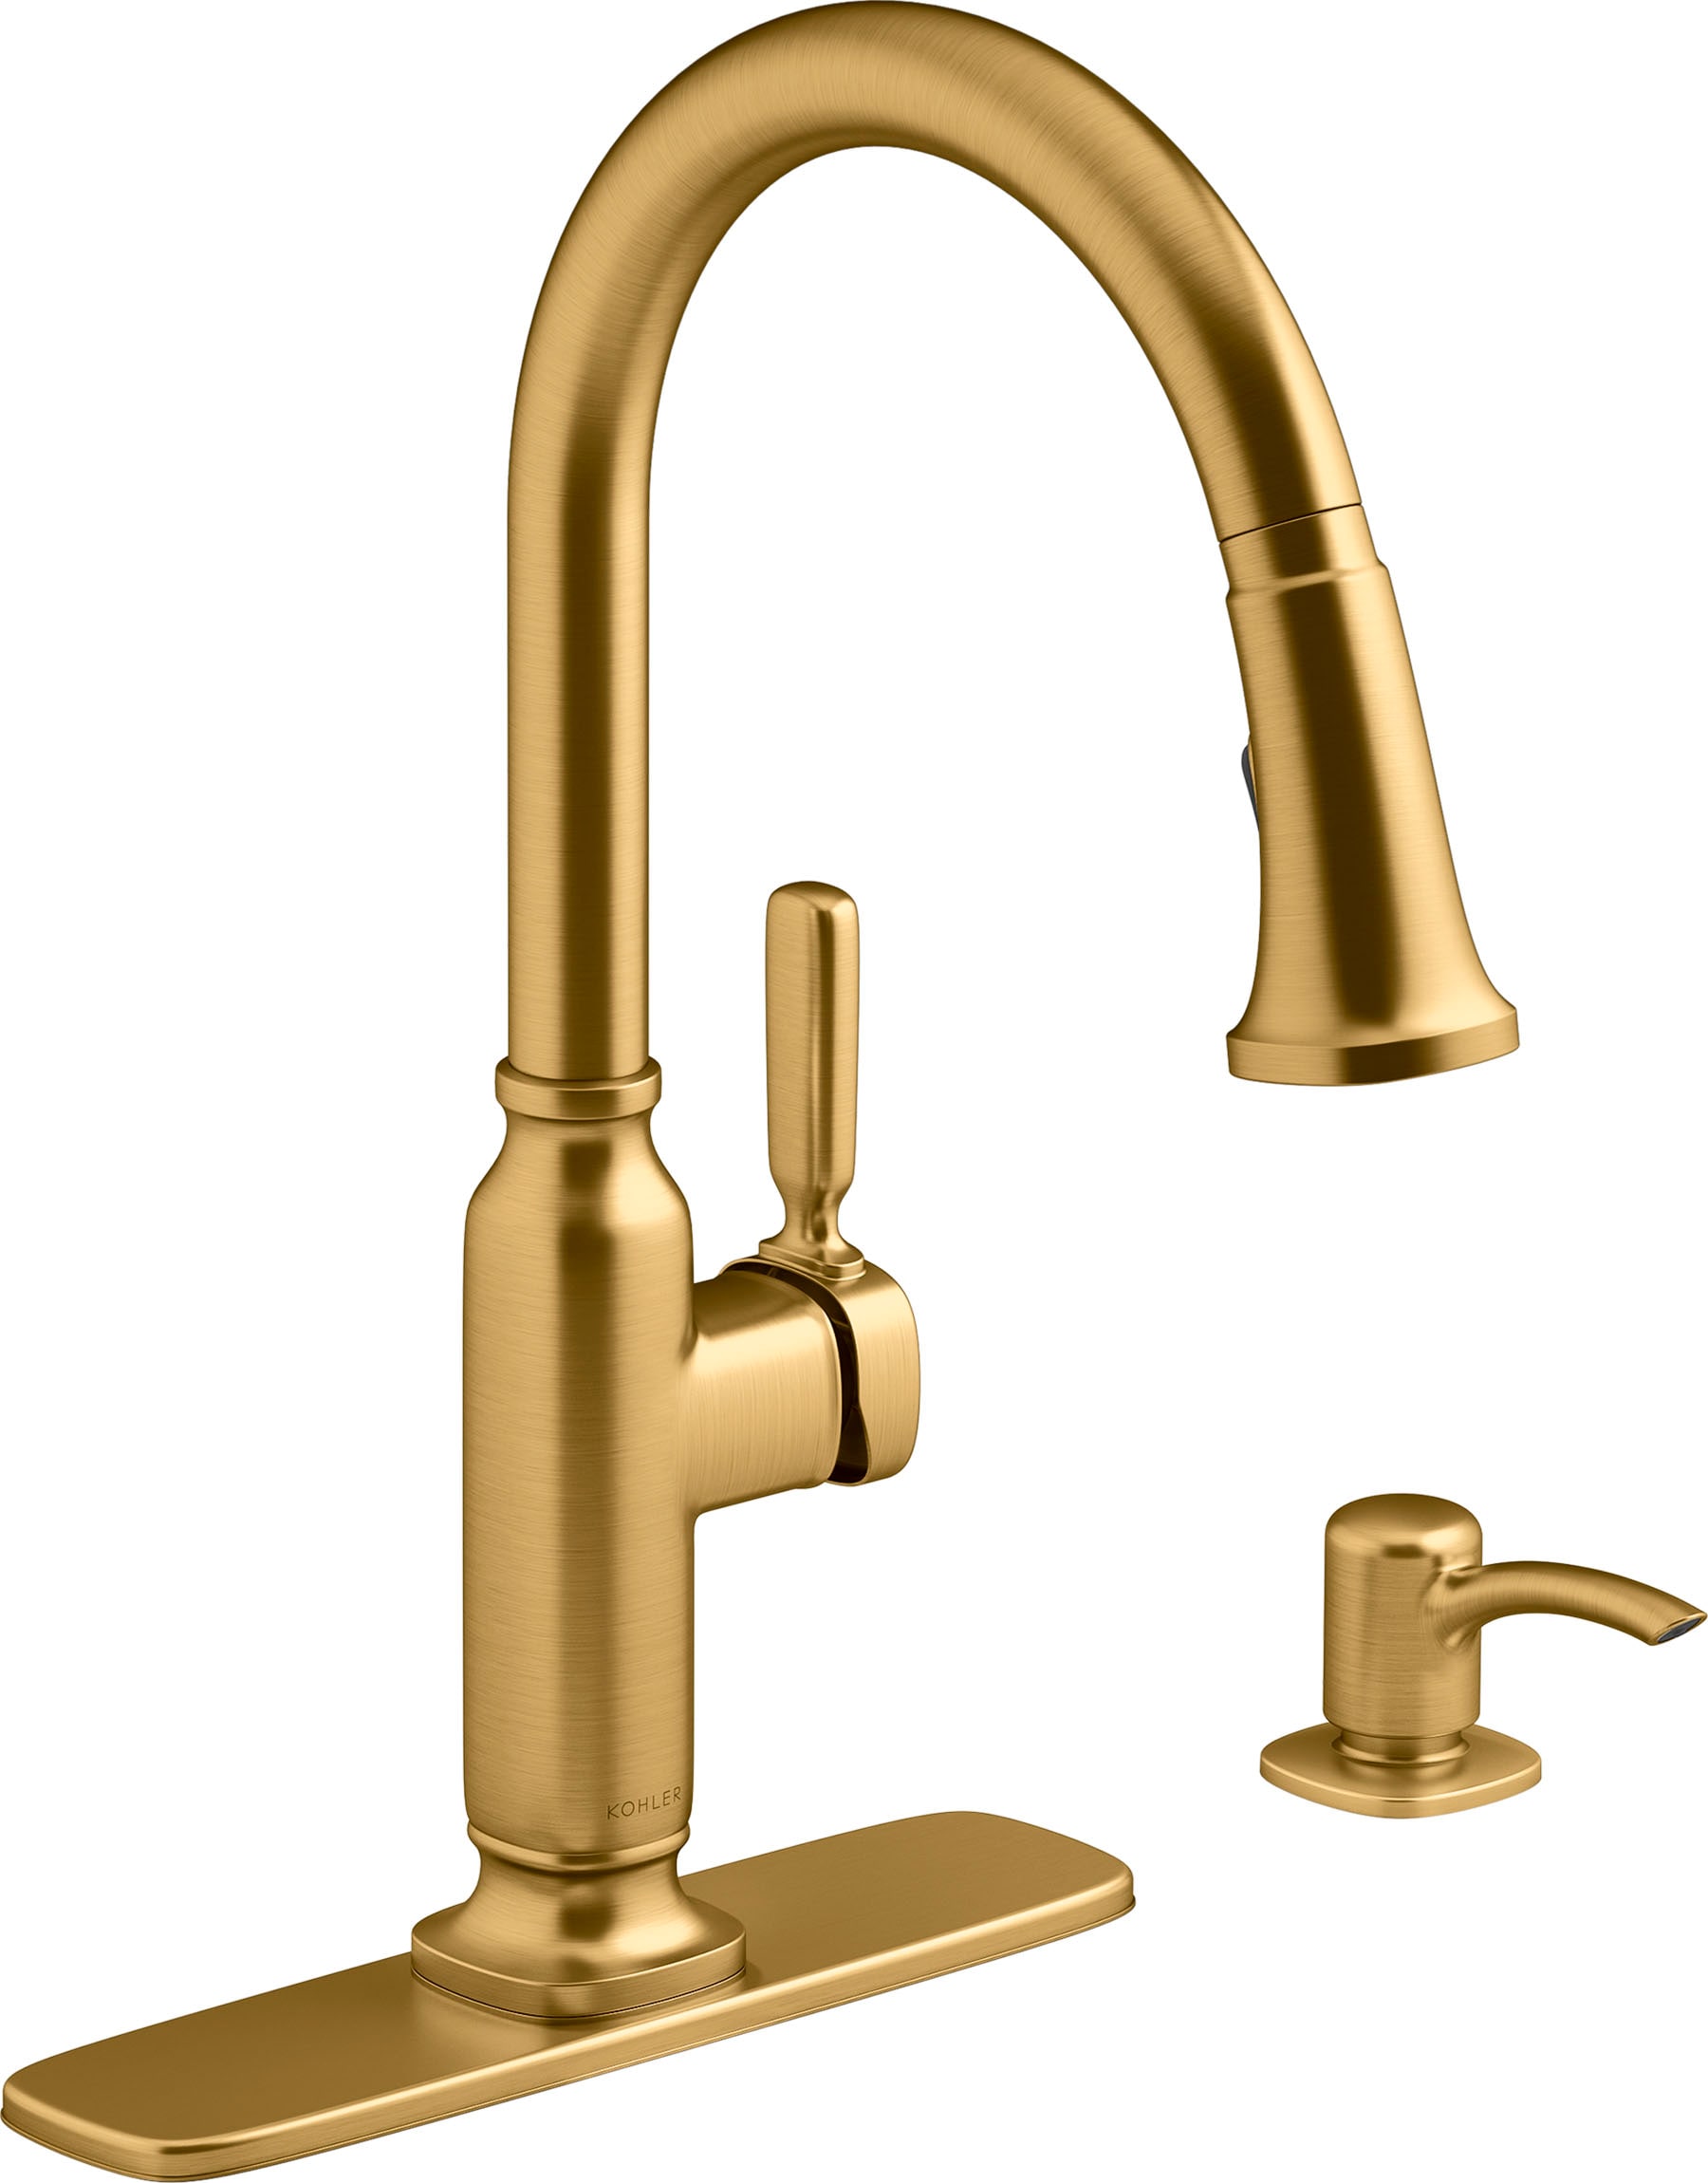 KOHLER Ealing Vibrant Brushed Moderne Brass Single Handle Pull-down Kitchen  Faucet with Deck Plate and Soap Dispenser Included in the Kitchen Faucets  department at